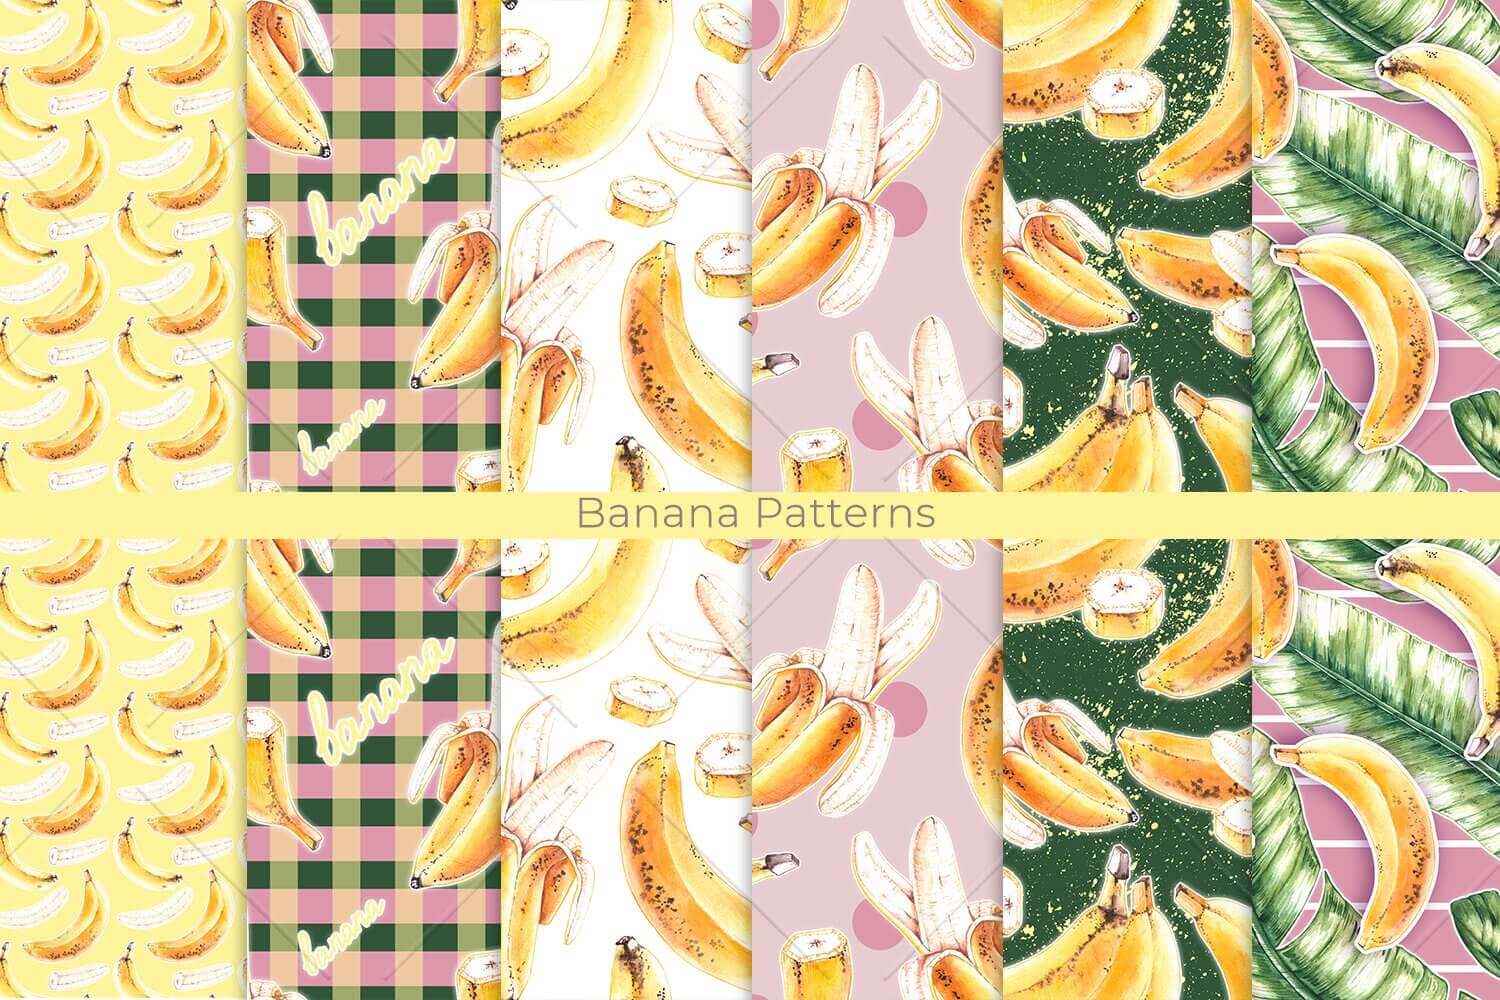 12 watercolor patterns featuring yellow bananas on pink, green and black backgrounds.